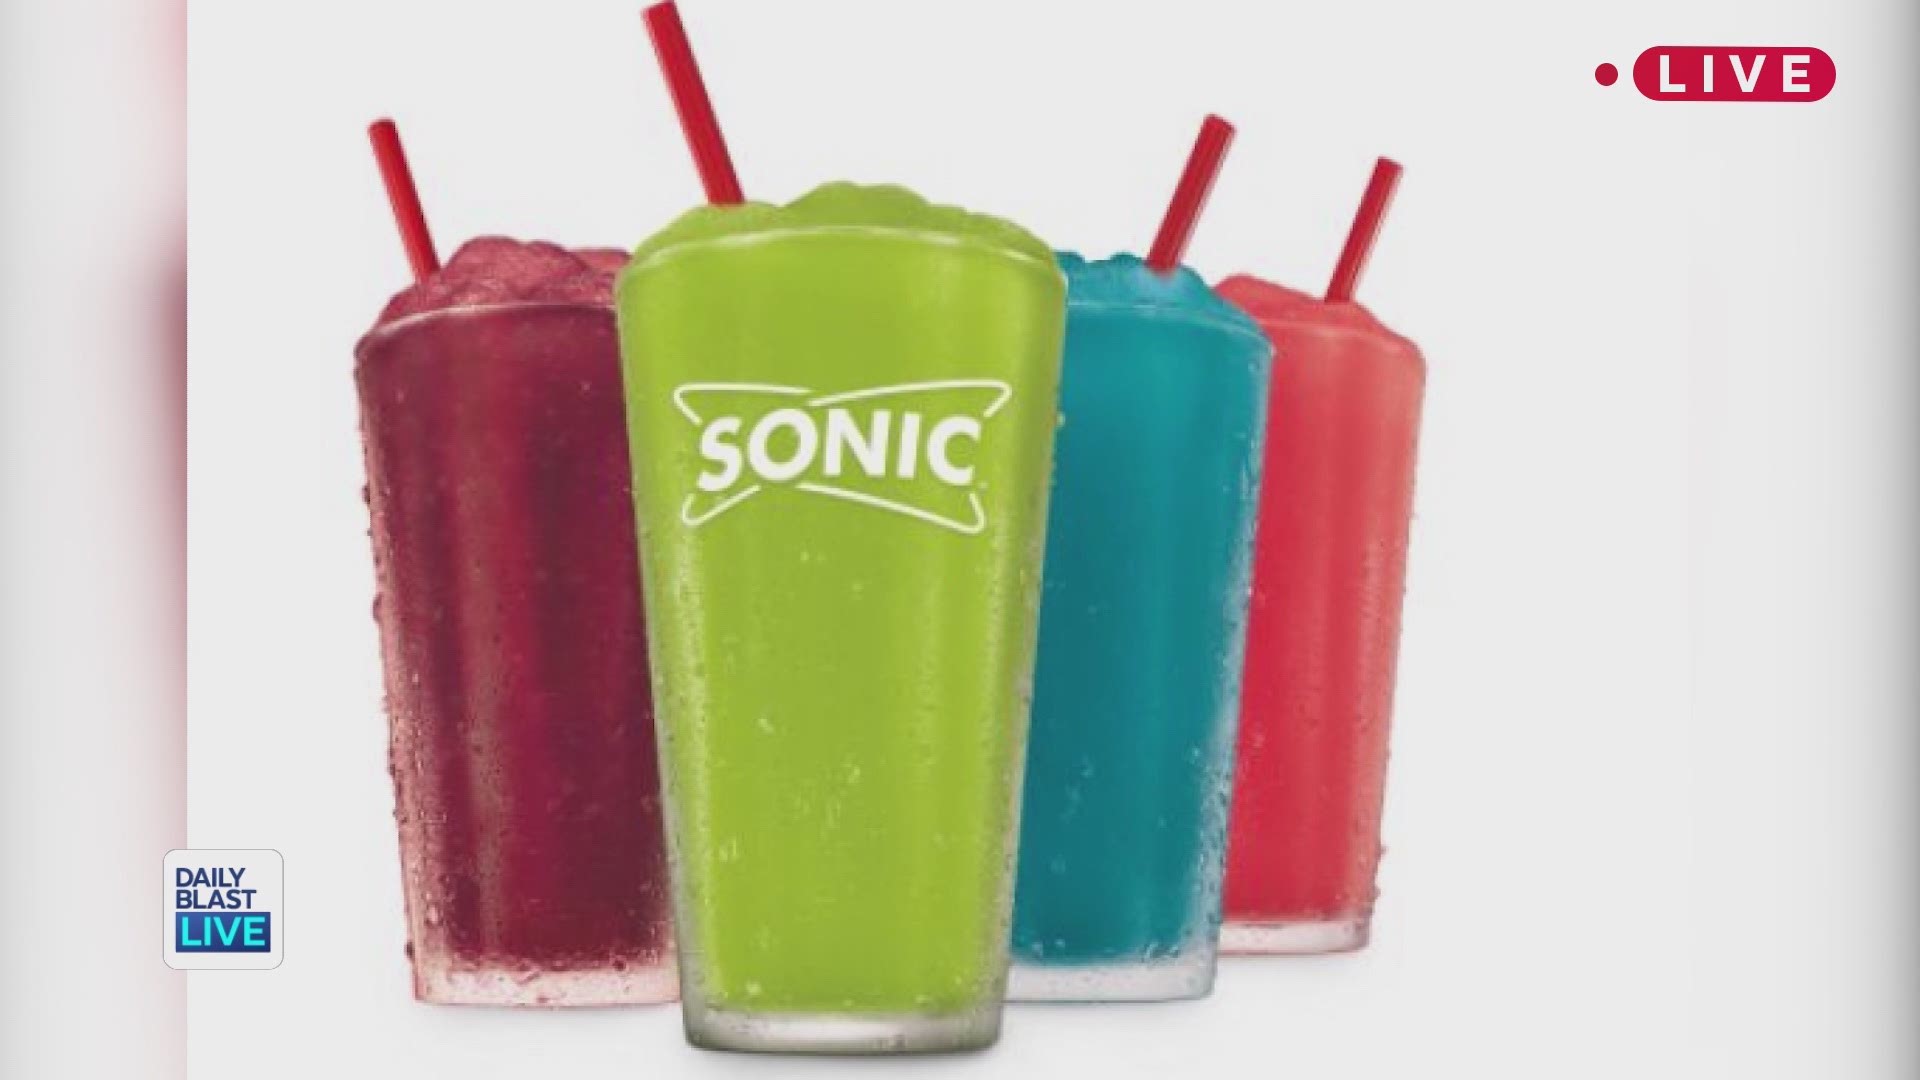 Pucker up for this sour slushy! The bright green limited-time drink will be joined by three new summertime flavors, but social media cannot get enough of this green drink. Described as sweet and tangy this slushy isn't appealing to all palettes, but Sonic